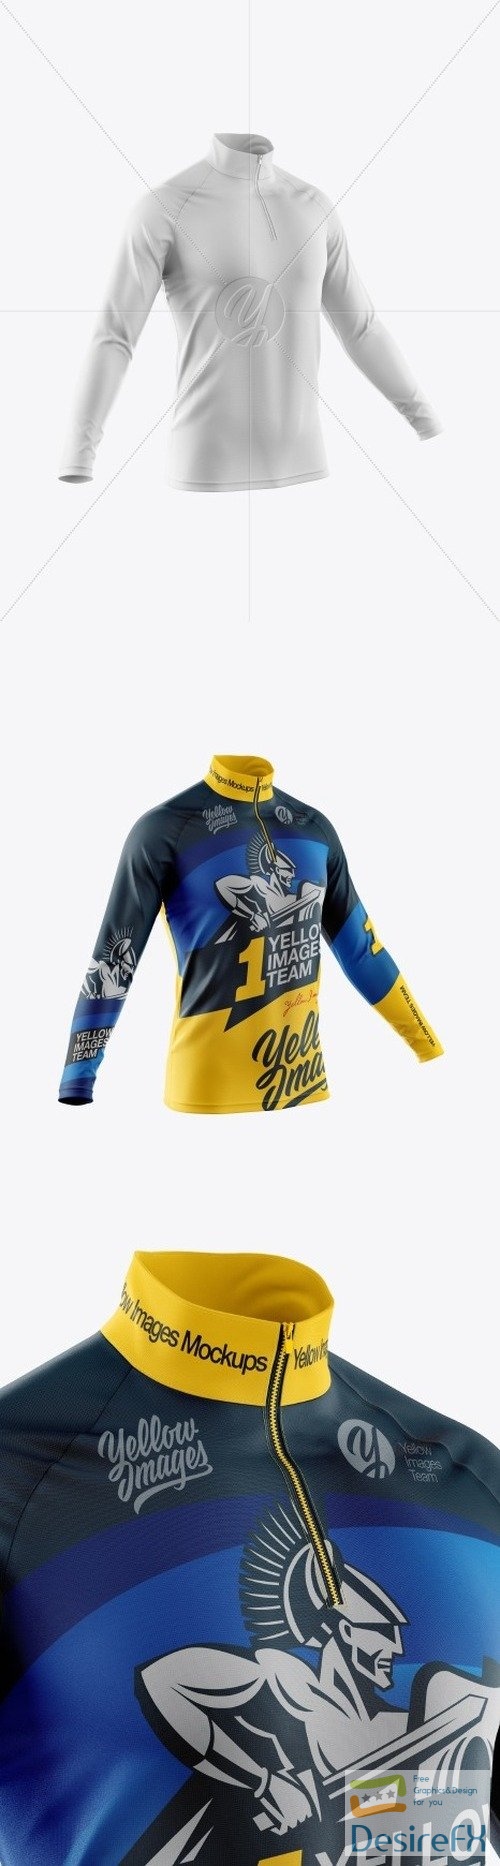 Men's Cycling Jersey With Long Sleeve Mockup - Half Side View 32975